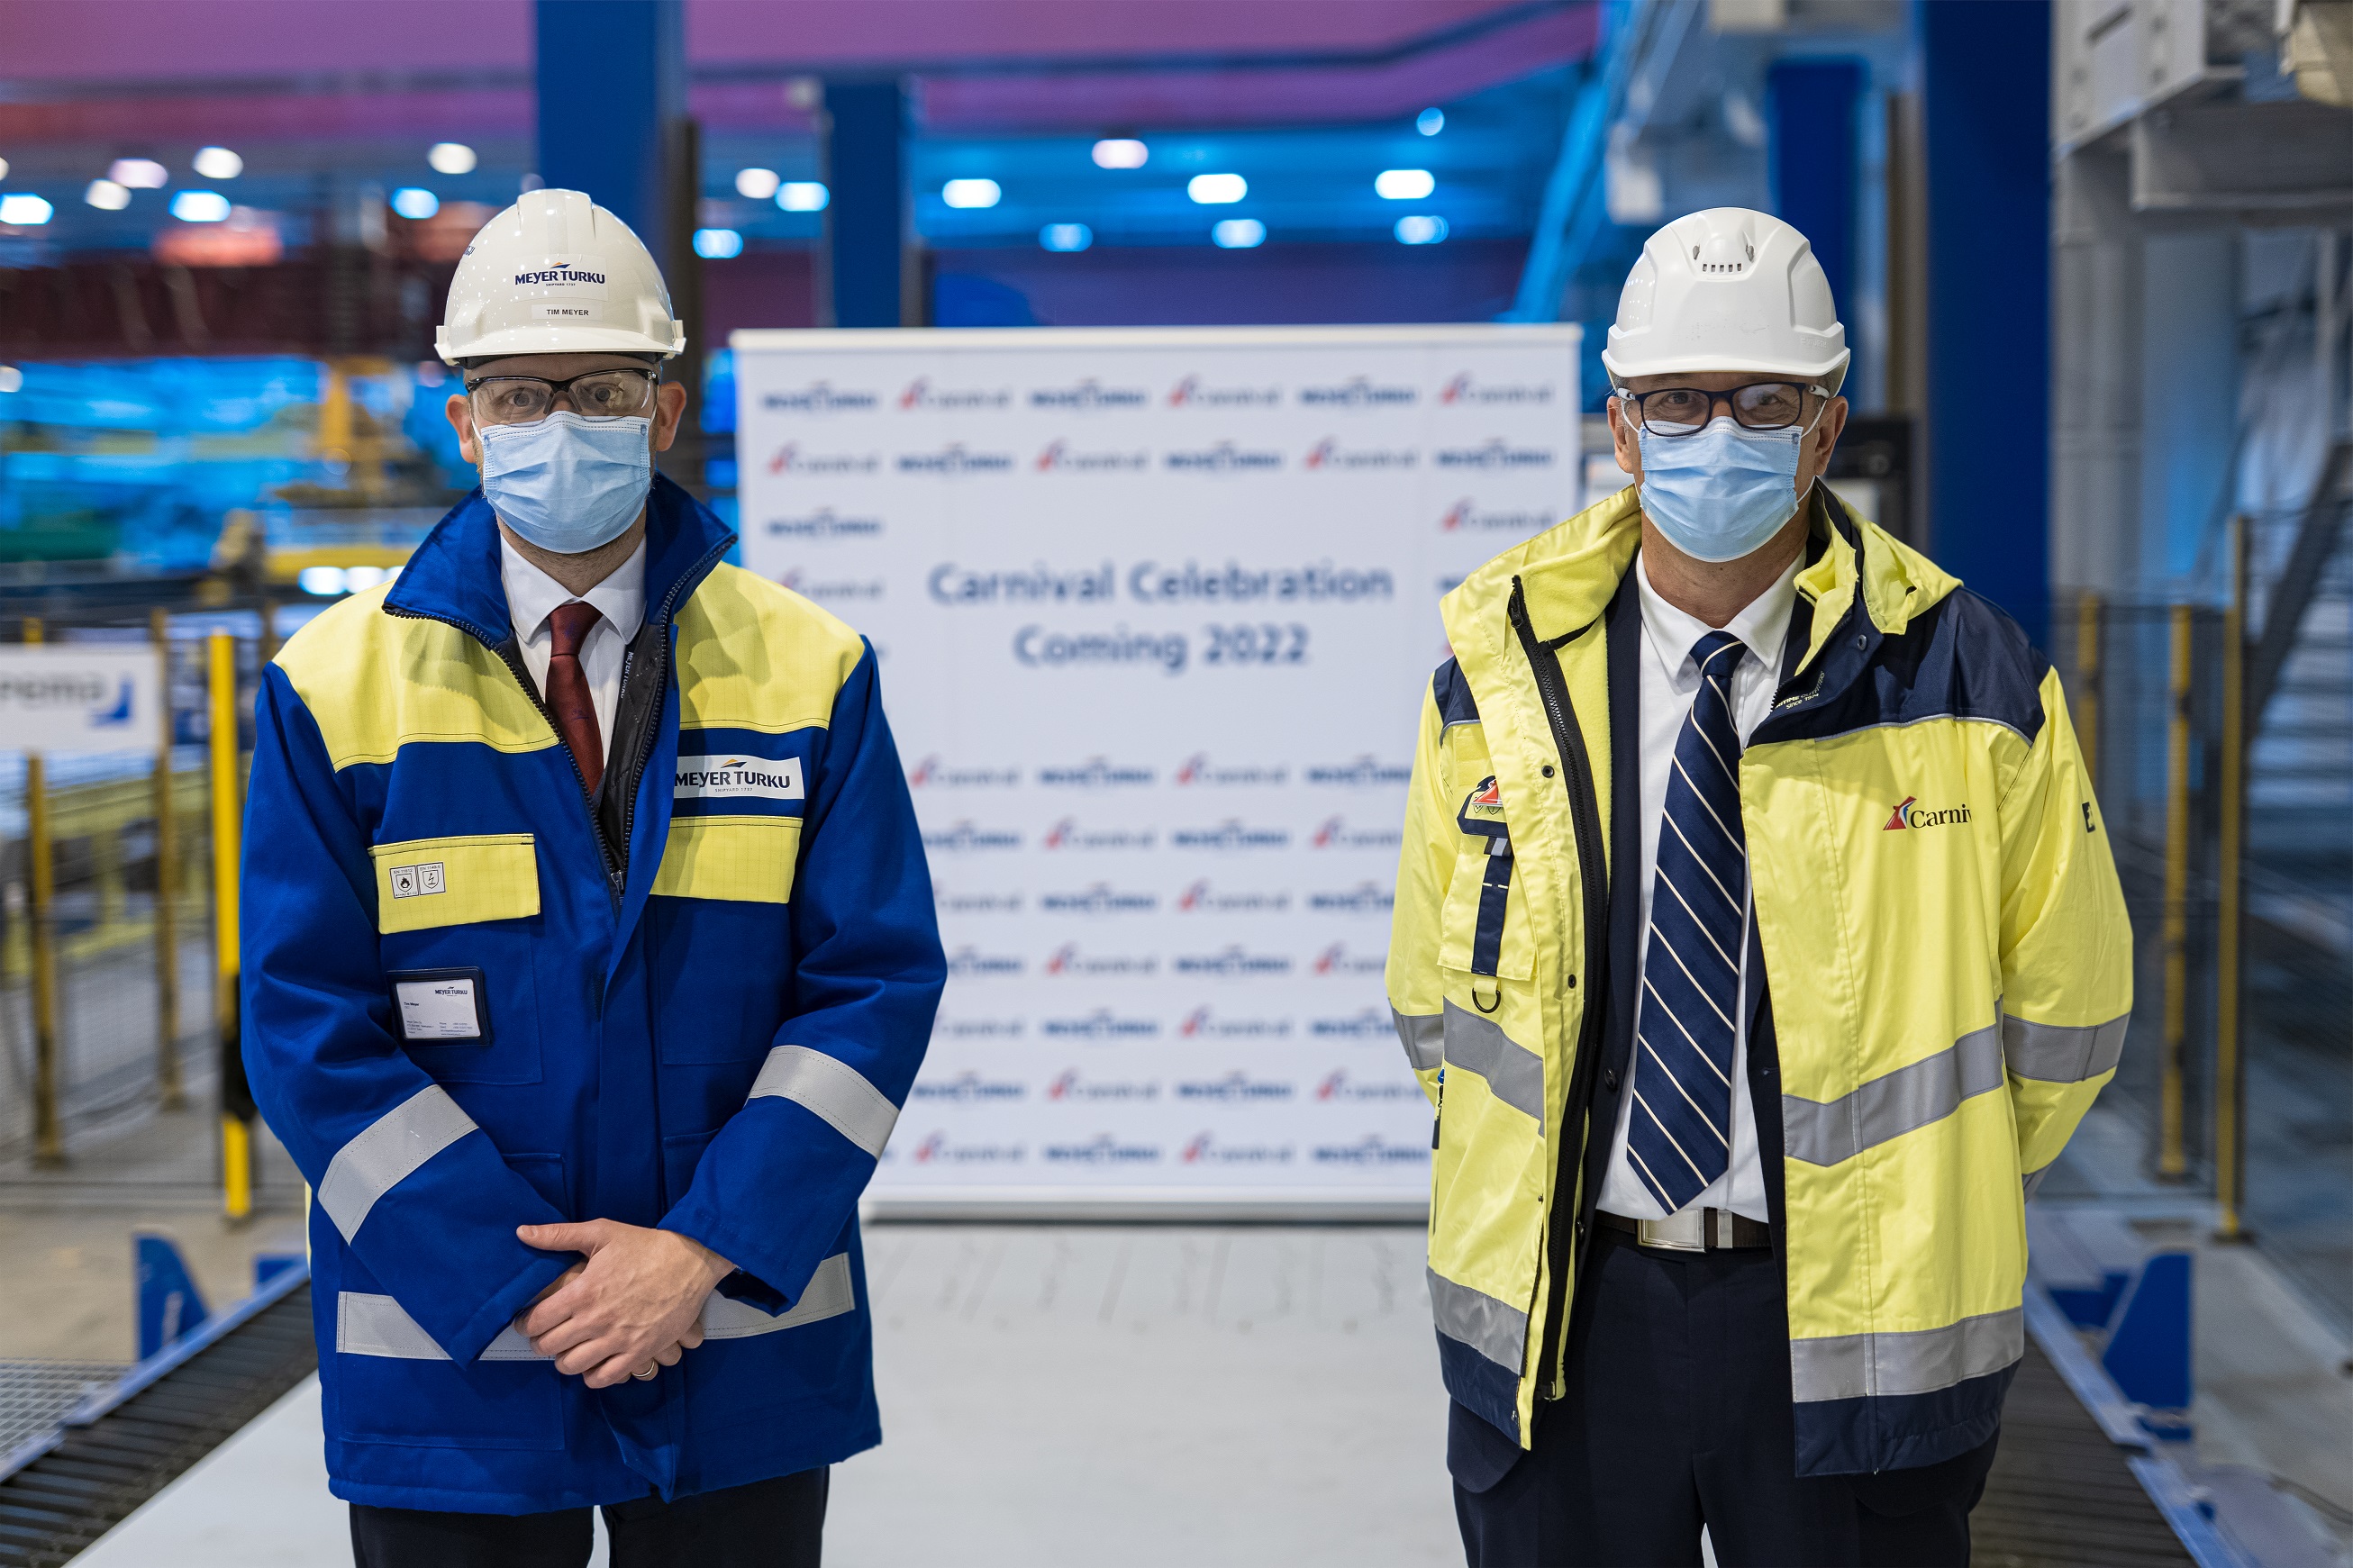 Steel cutting ceremony for Carnival Celebration